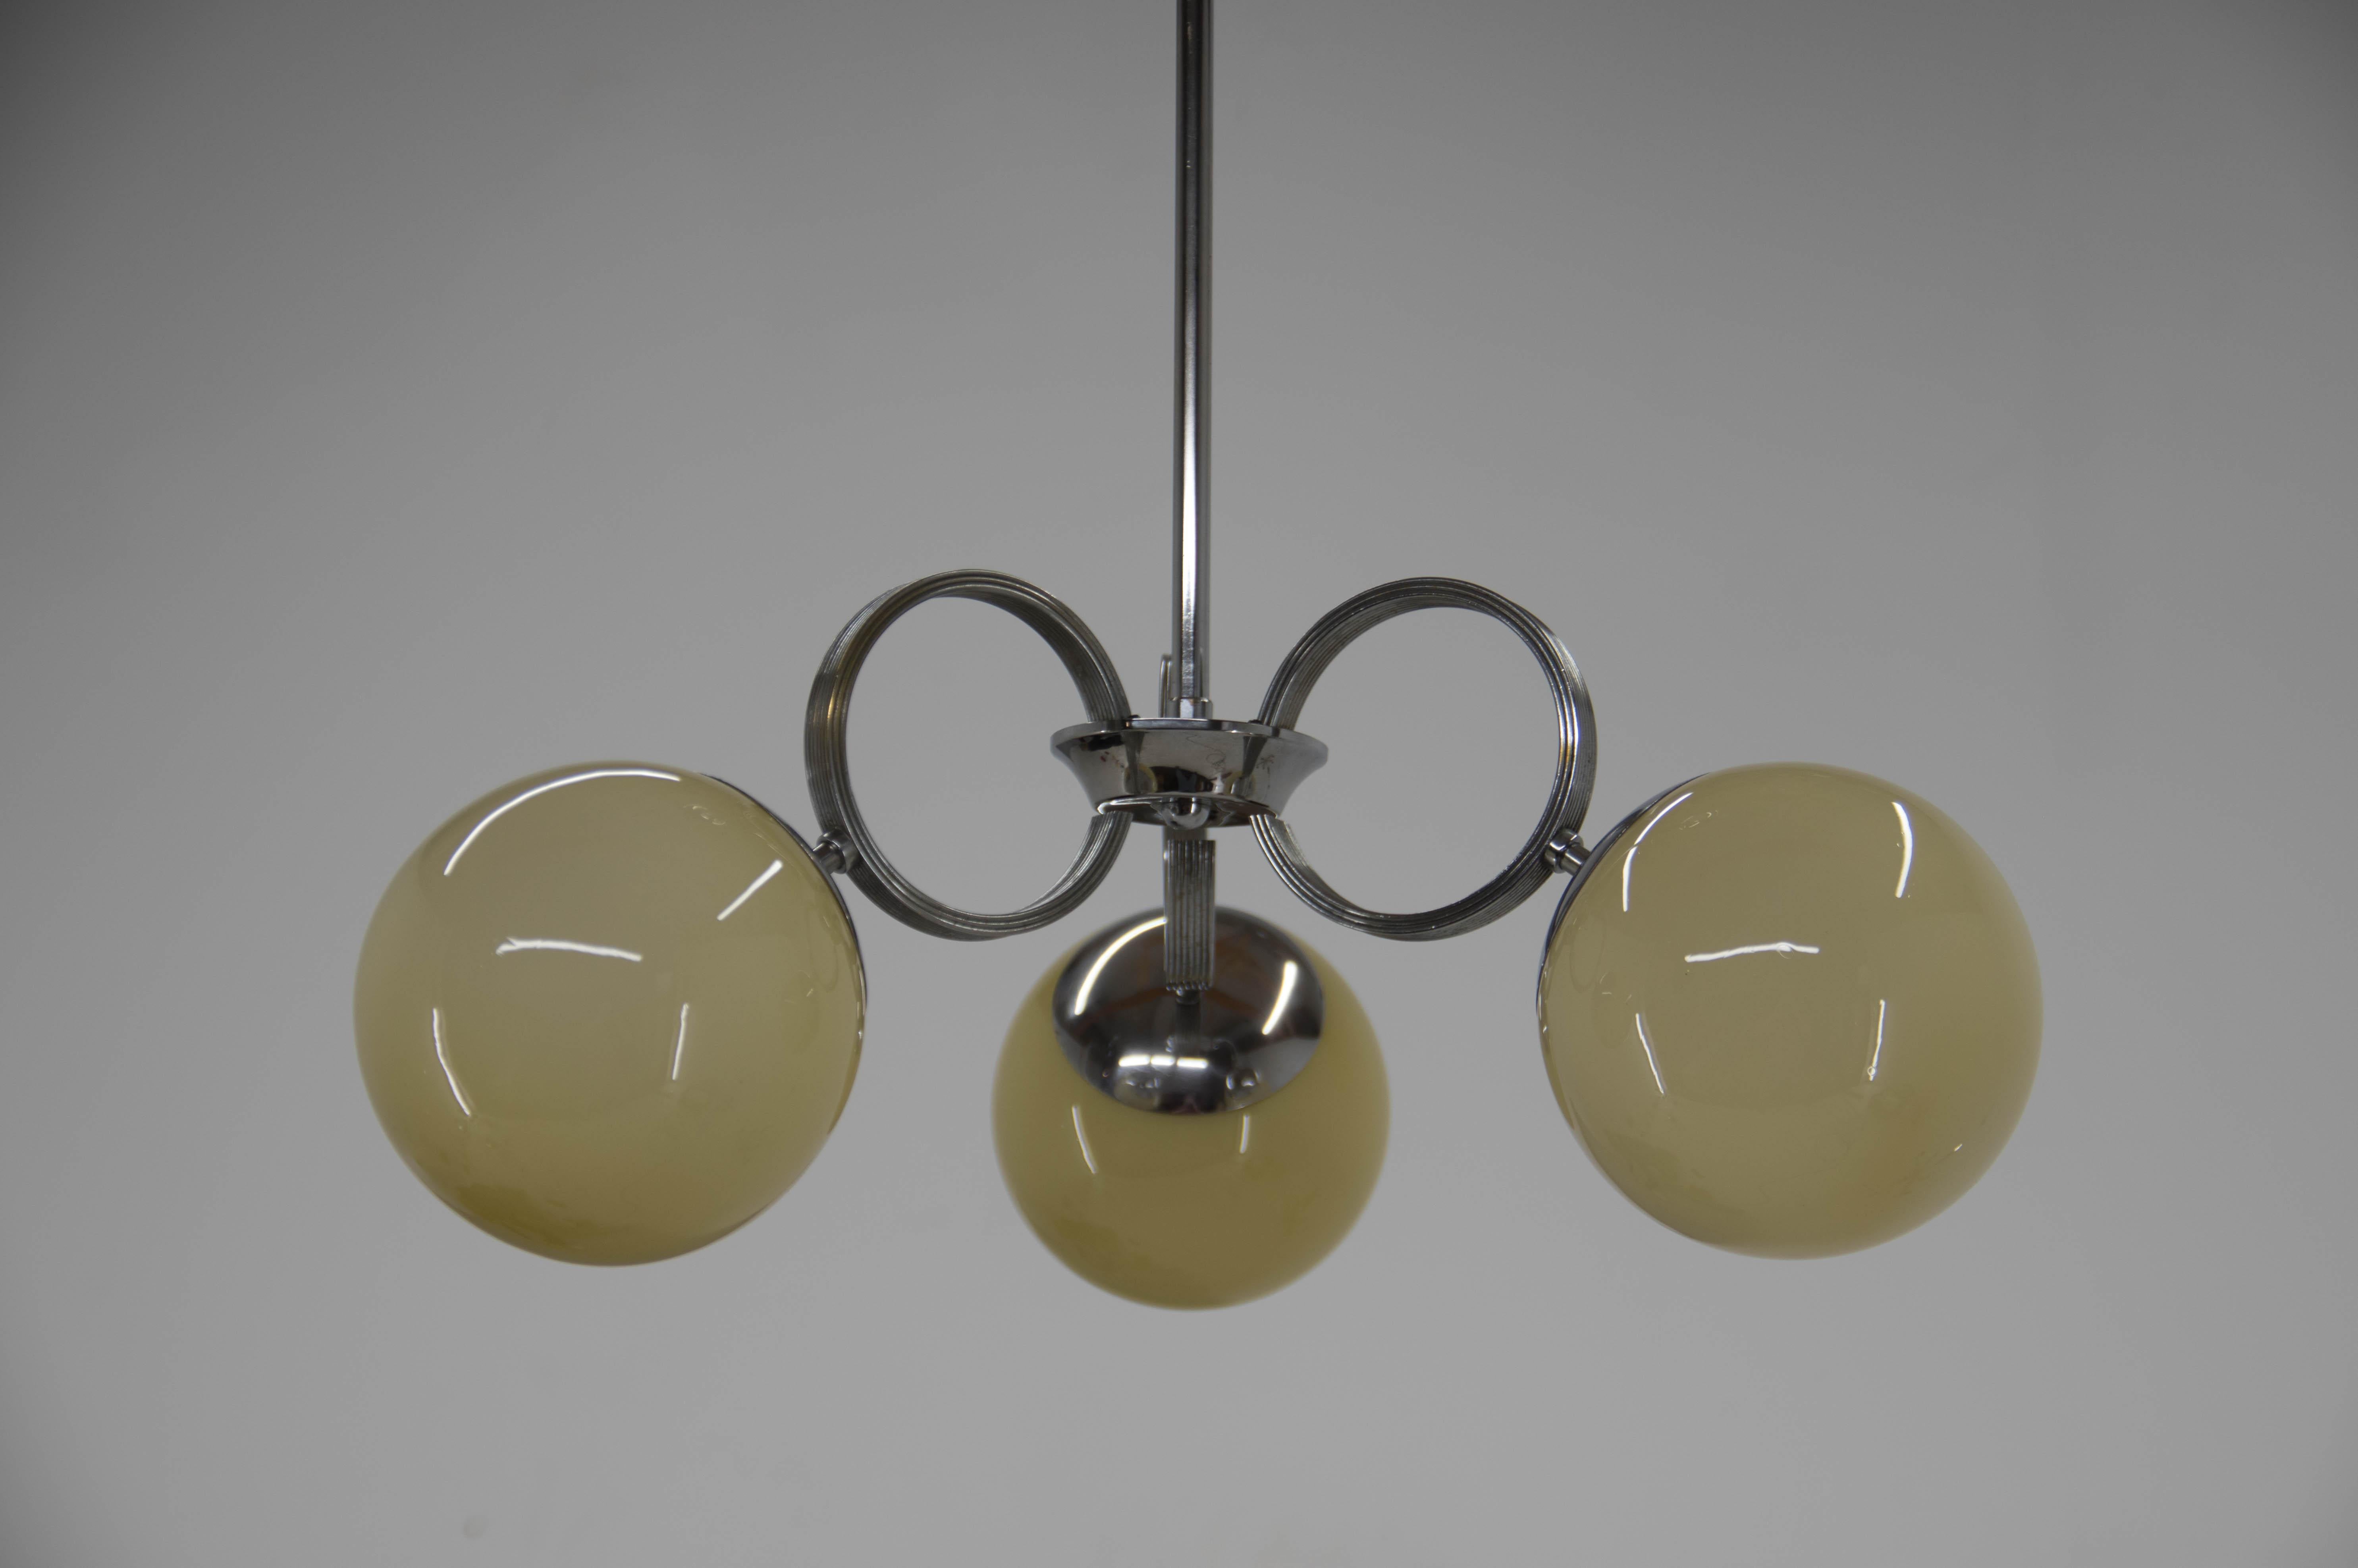 Chrome base and champaigne blown glass shades.
Restored: cleaned, rewired.
3x40W, E25-E27 bulbs
US wiring compatible